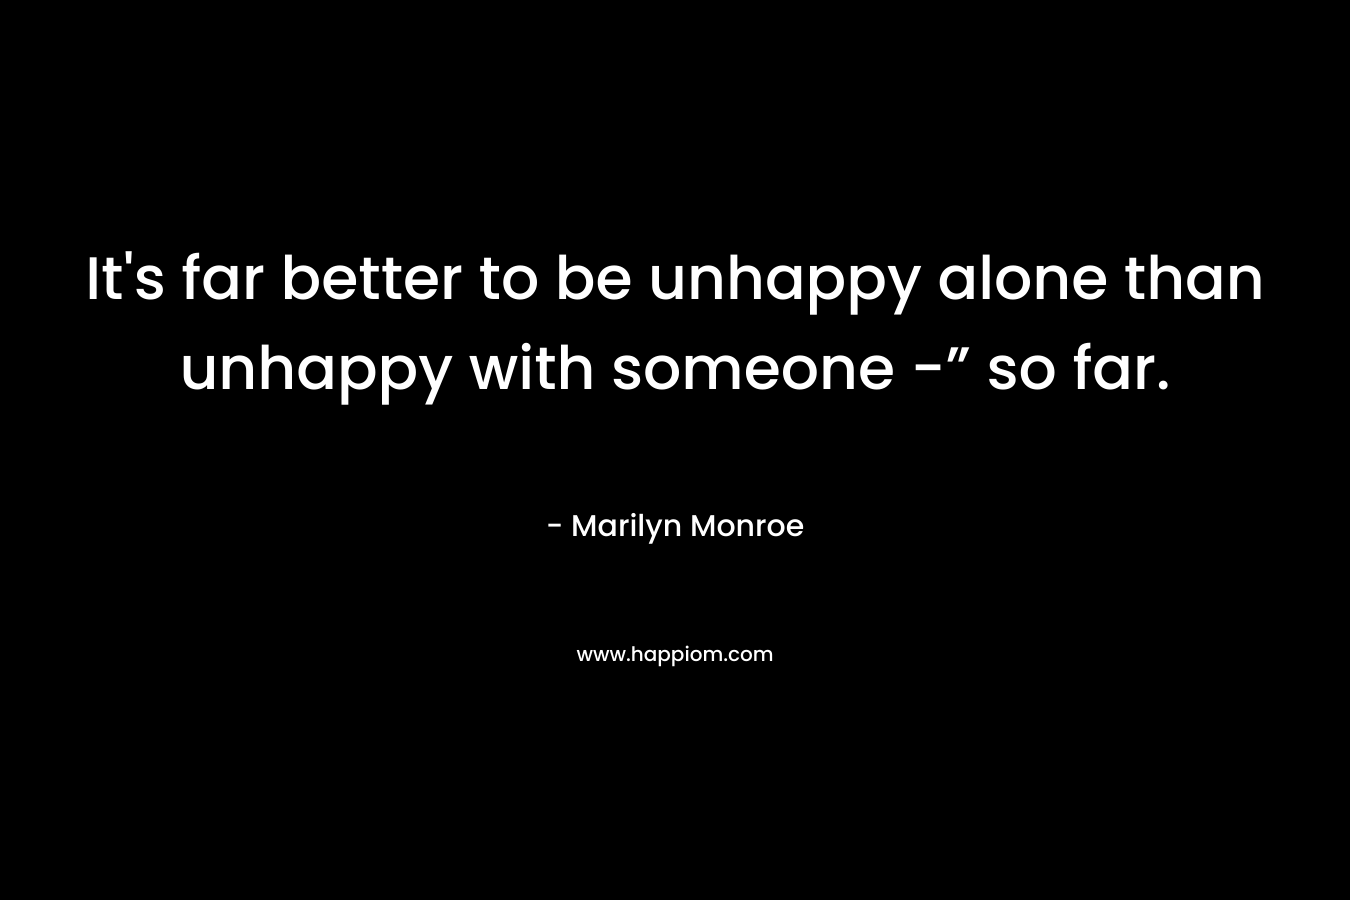 It's far better to be unhappy alone than unhappy with someone -” so far.